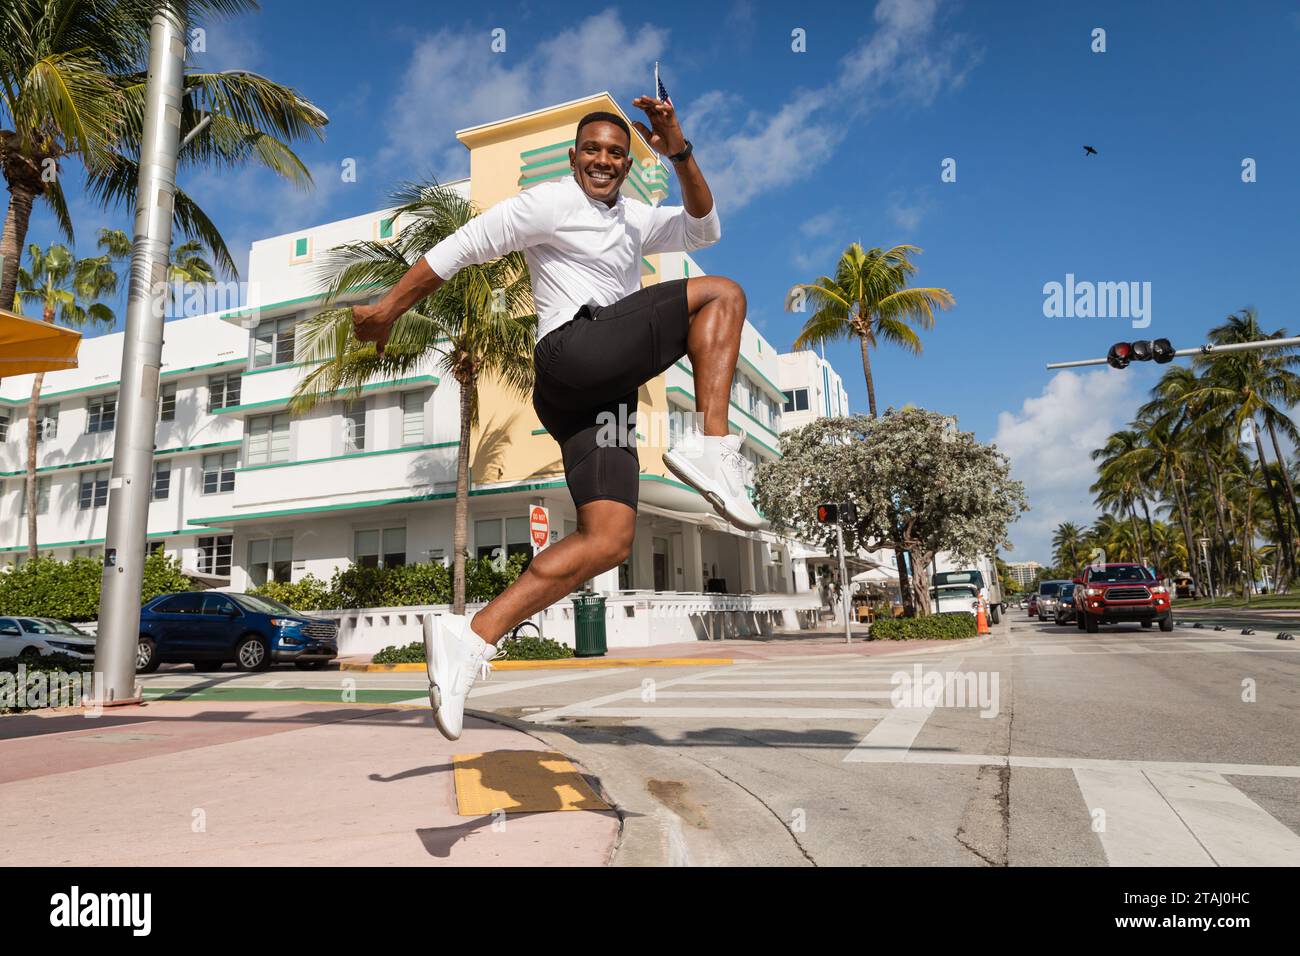 cheerful african american man jumping next to palm trees and modern condominium in Miami Stock Photo